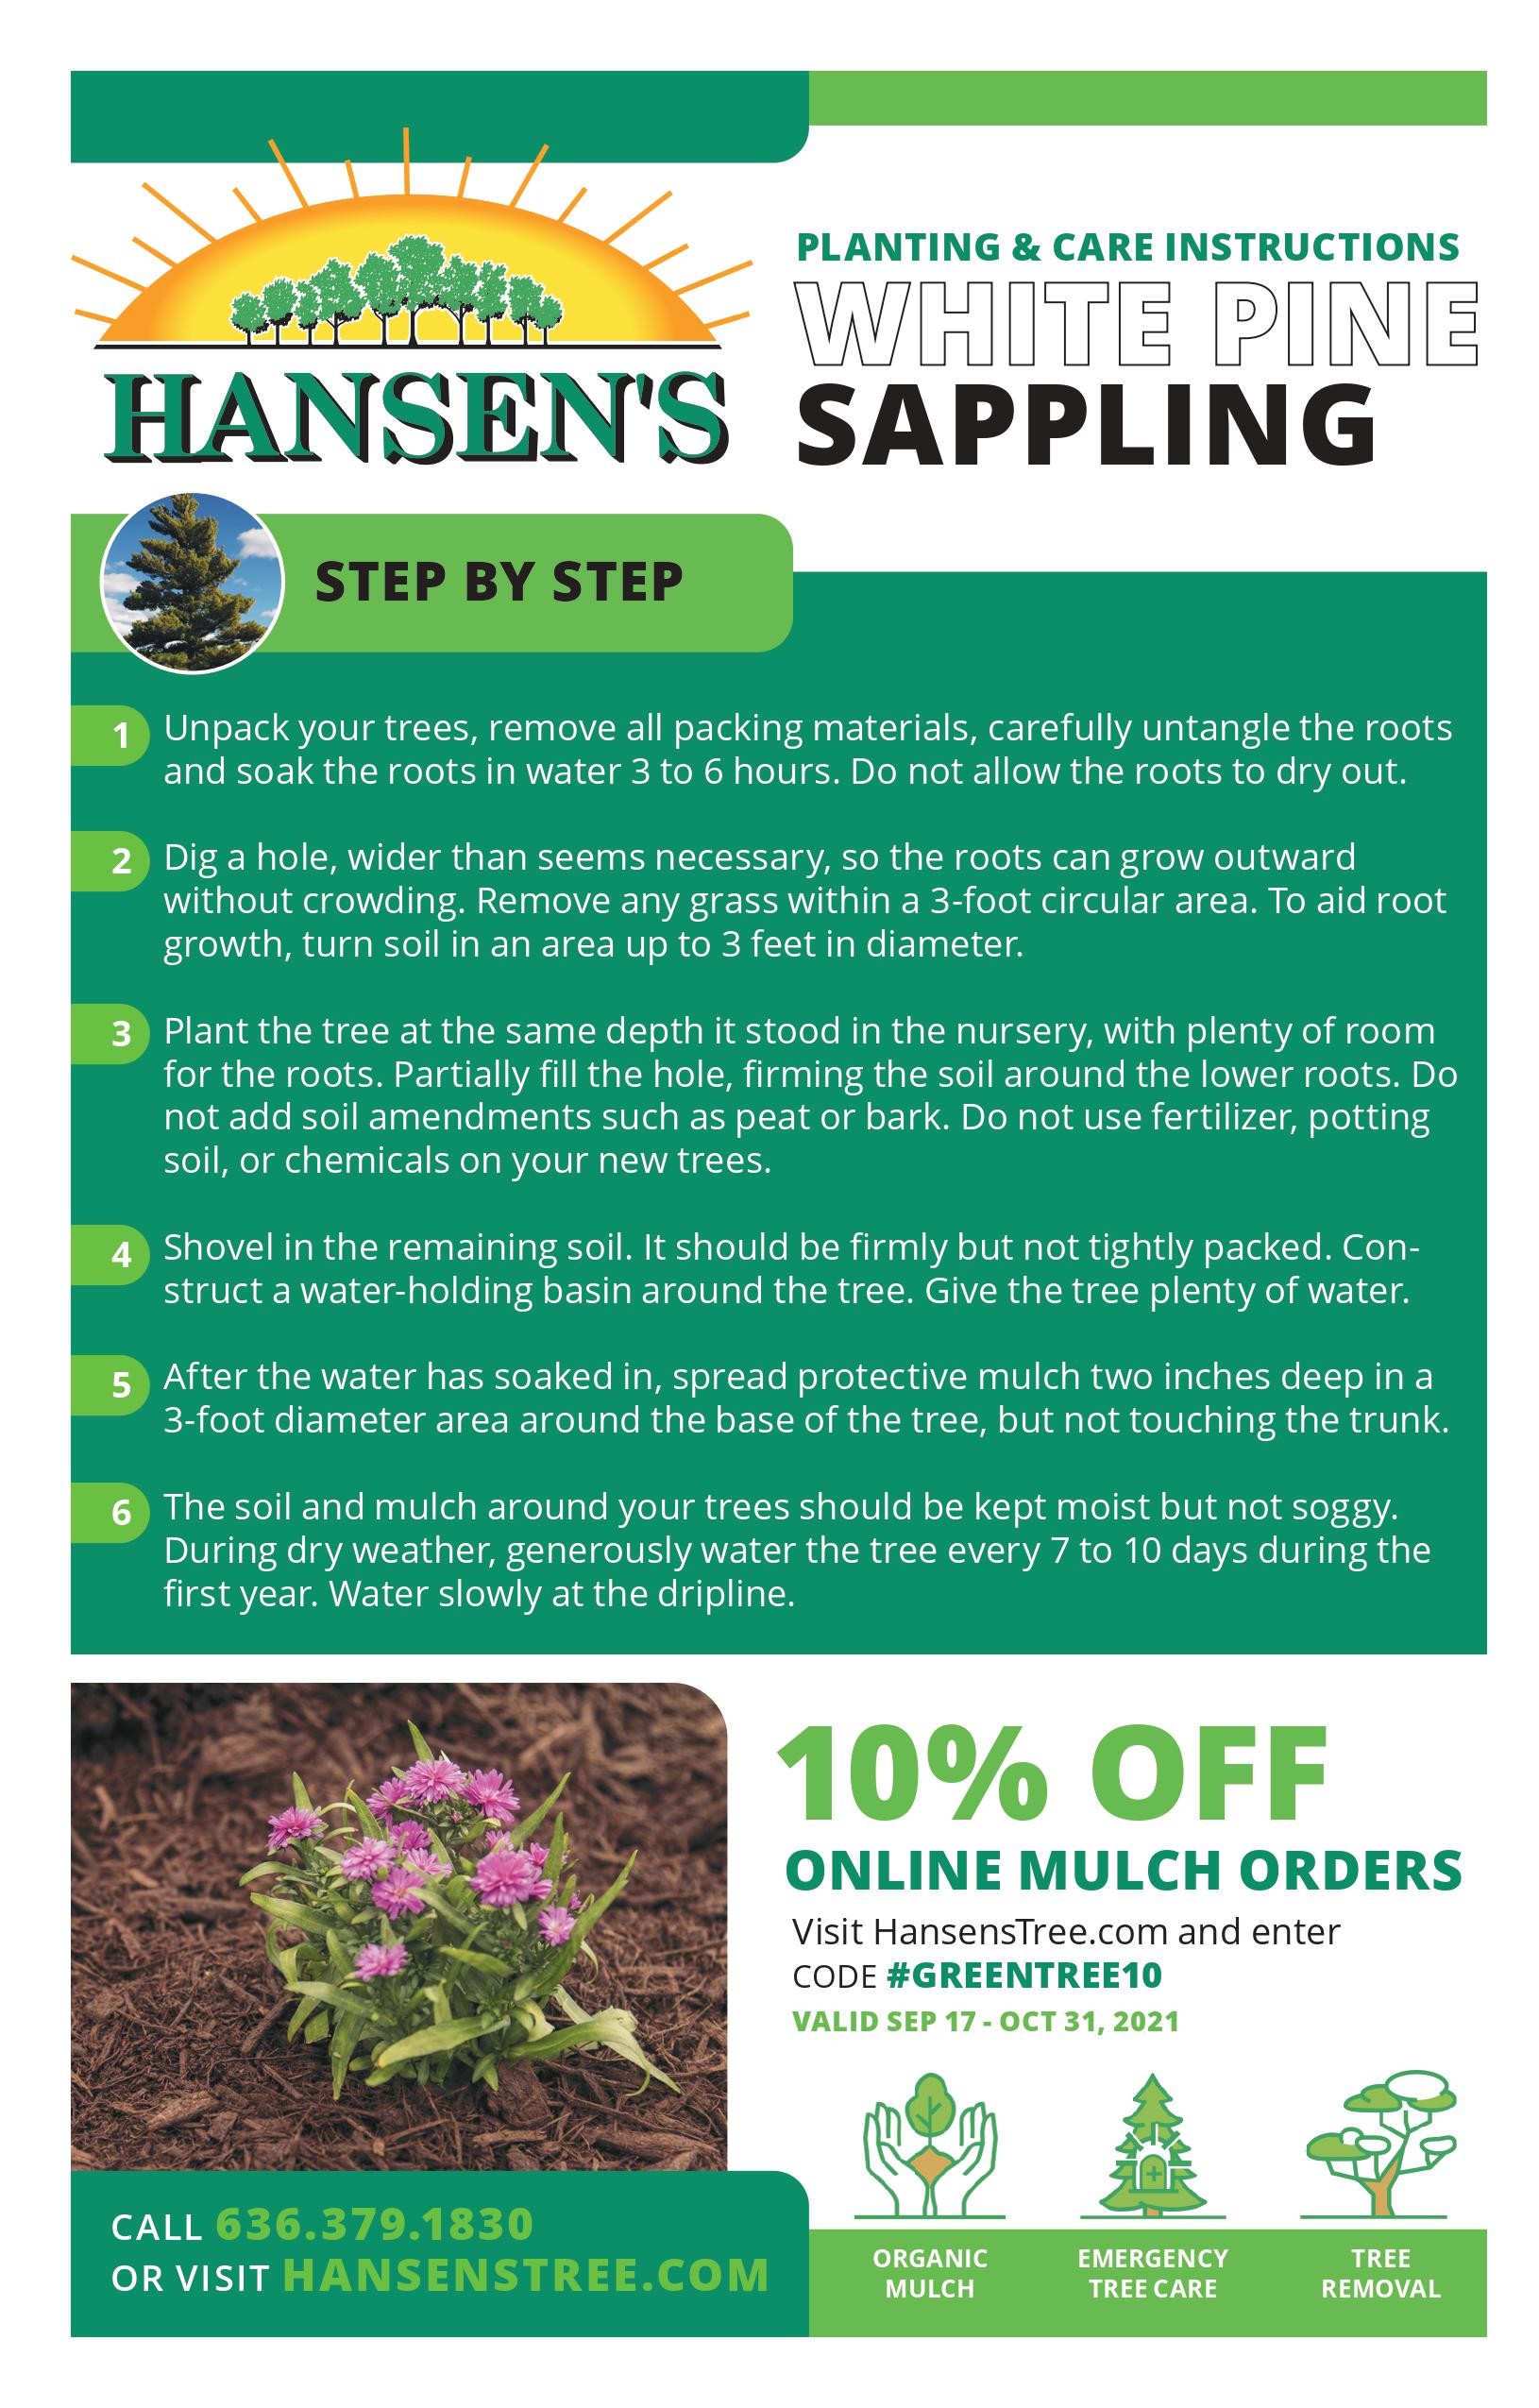 White Pine Care & Planting Instructions